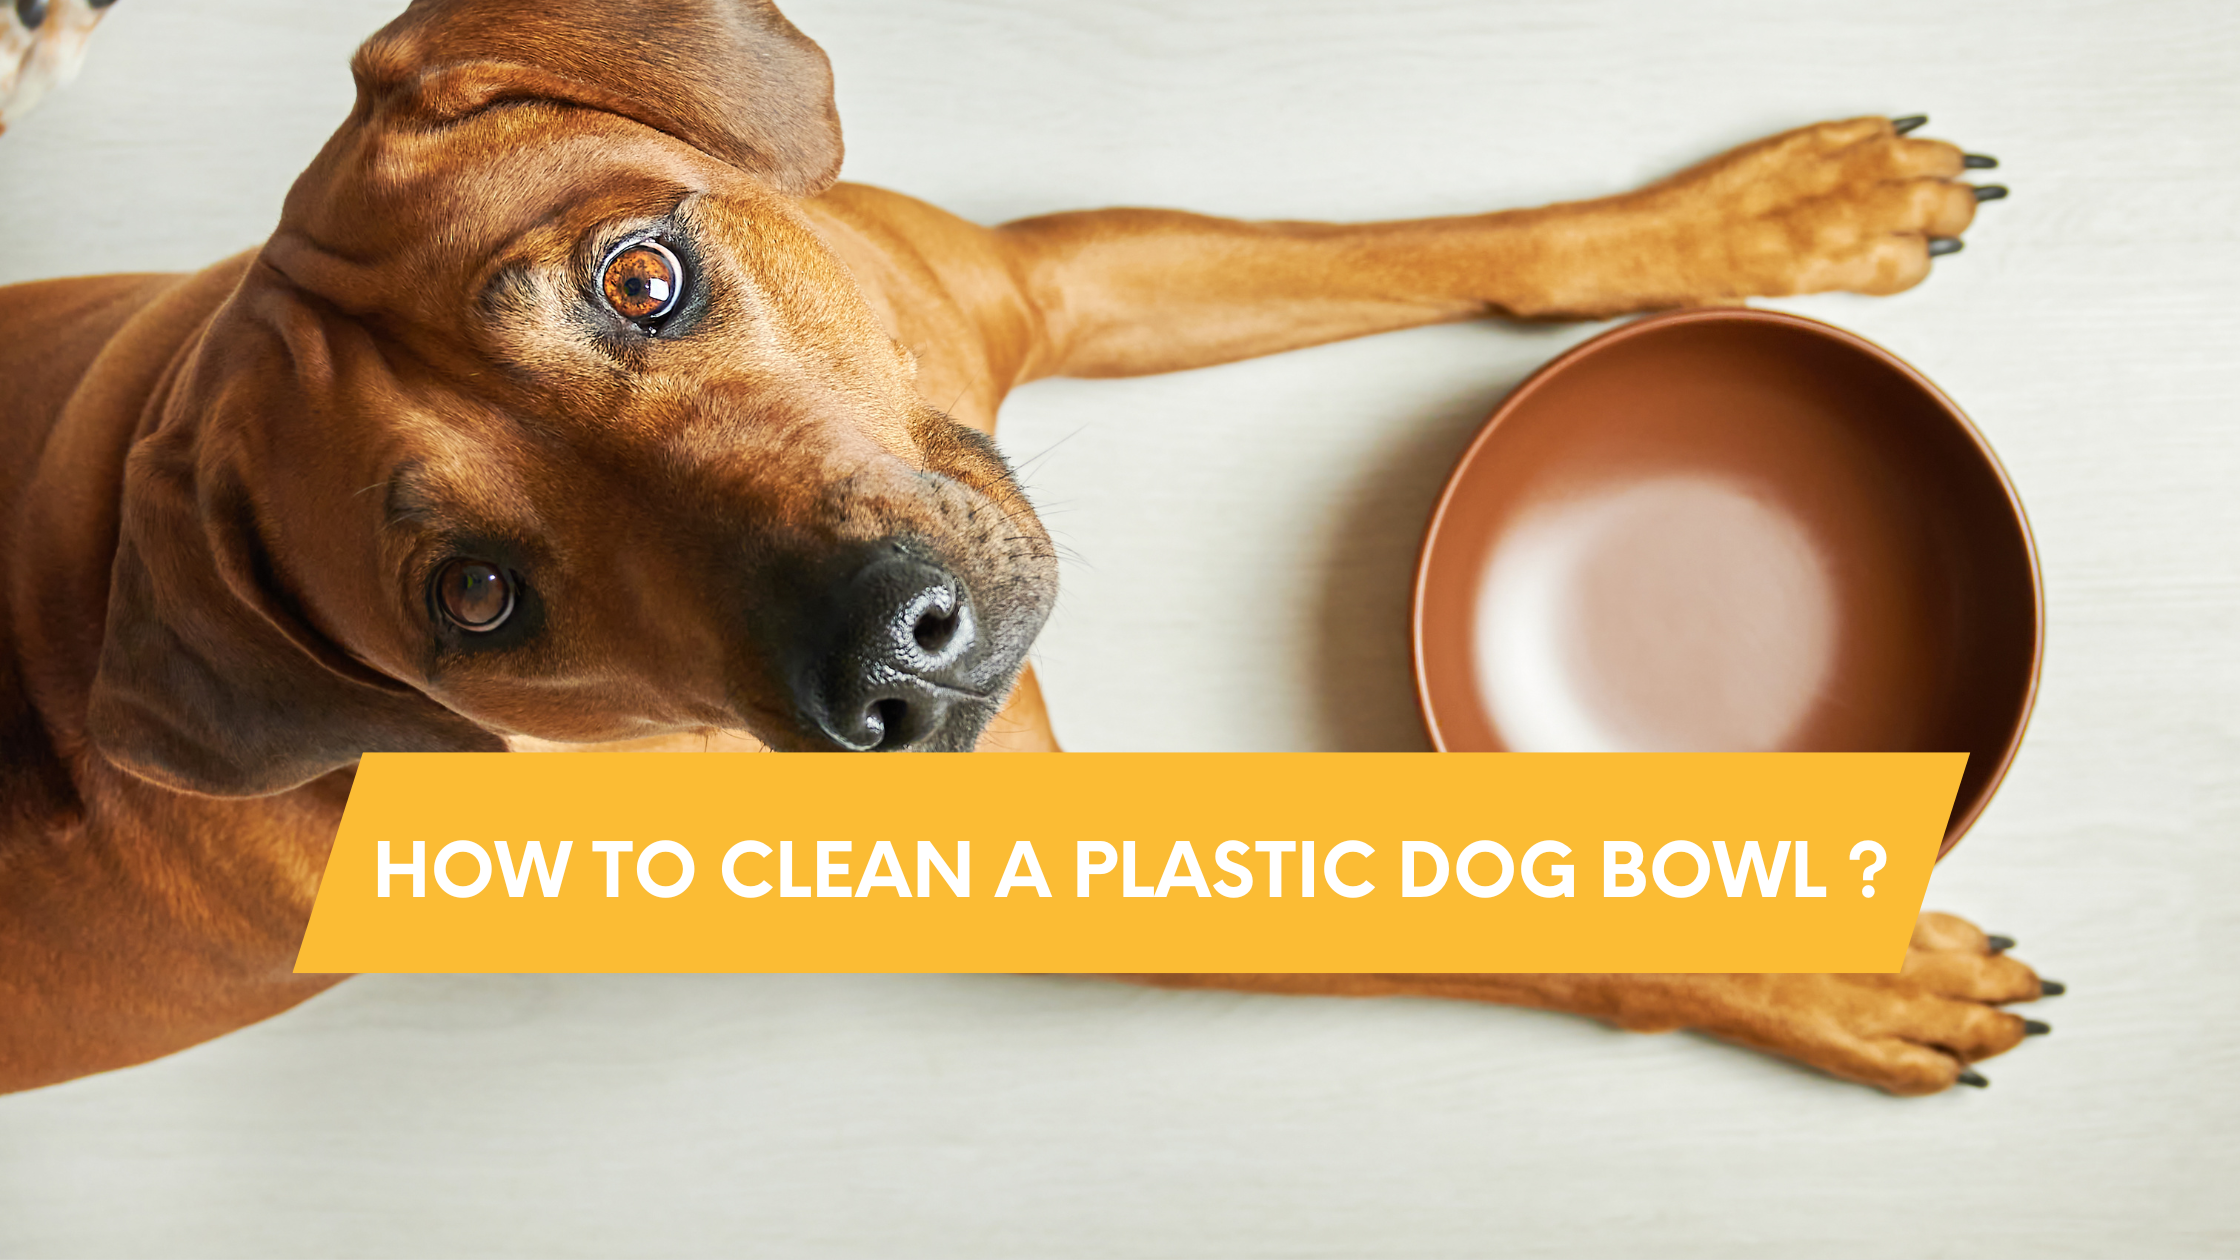 How to clean a plastic dog bowl